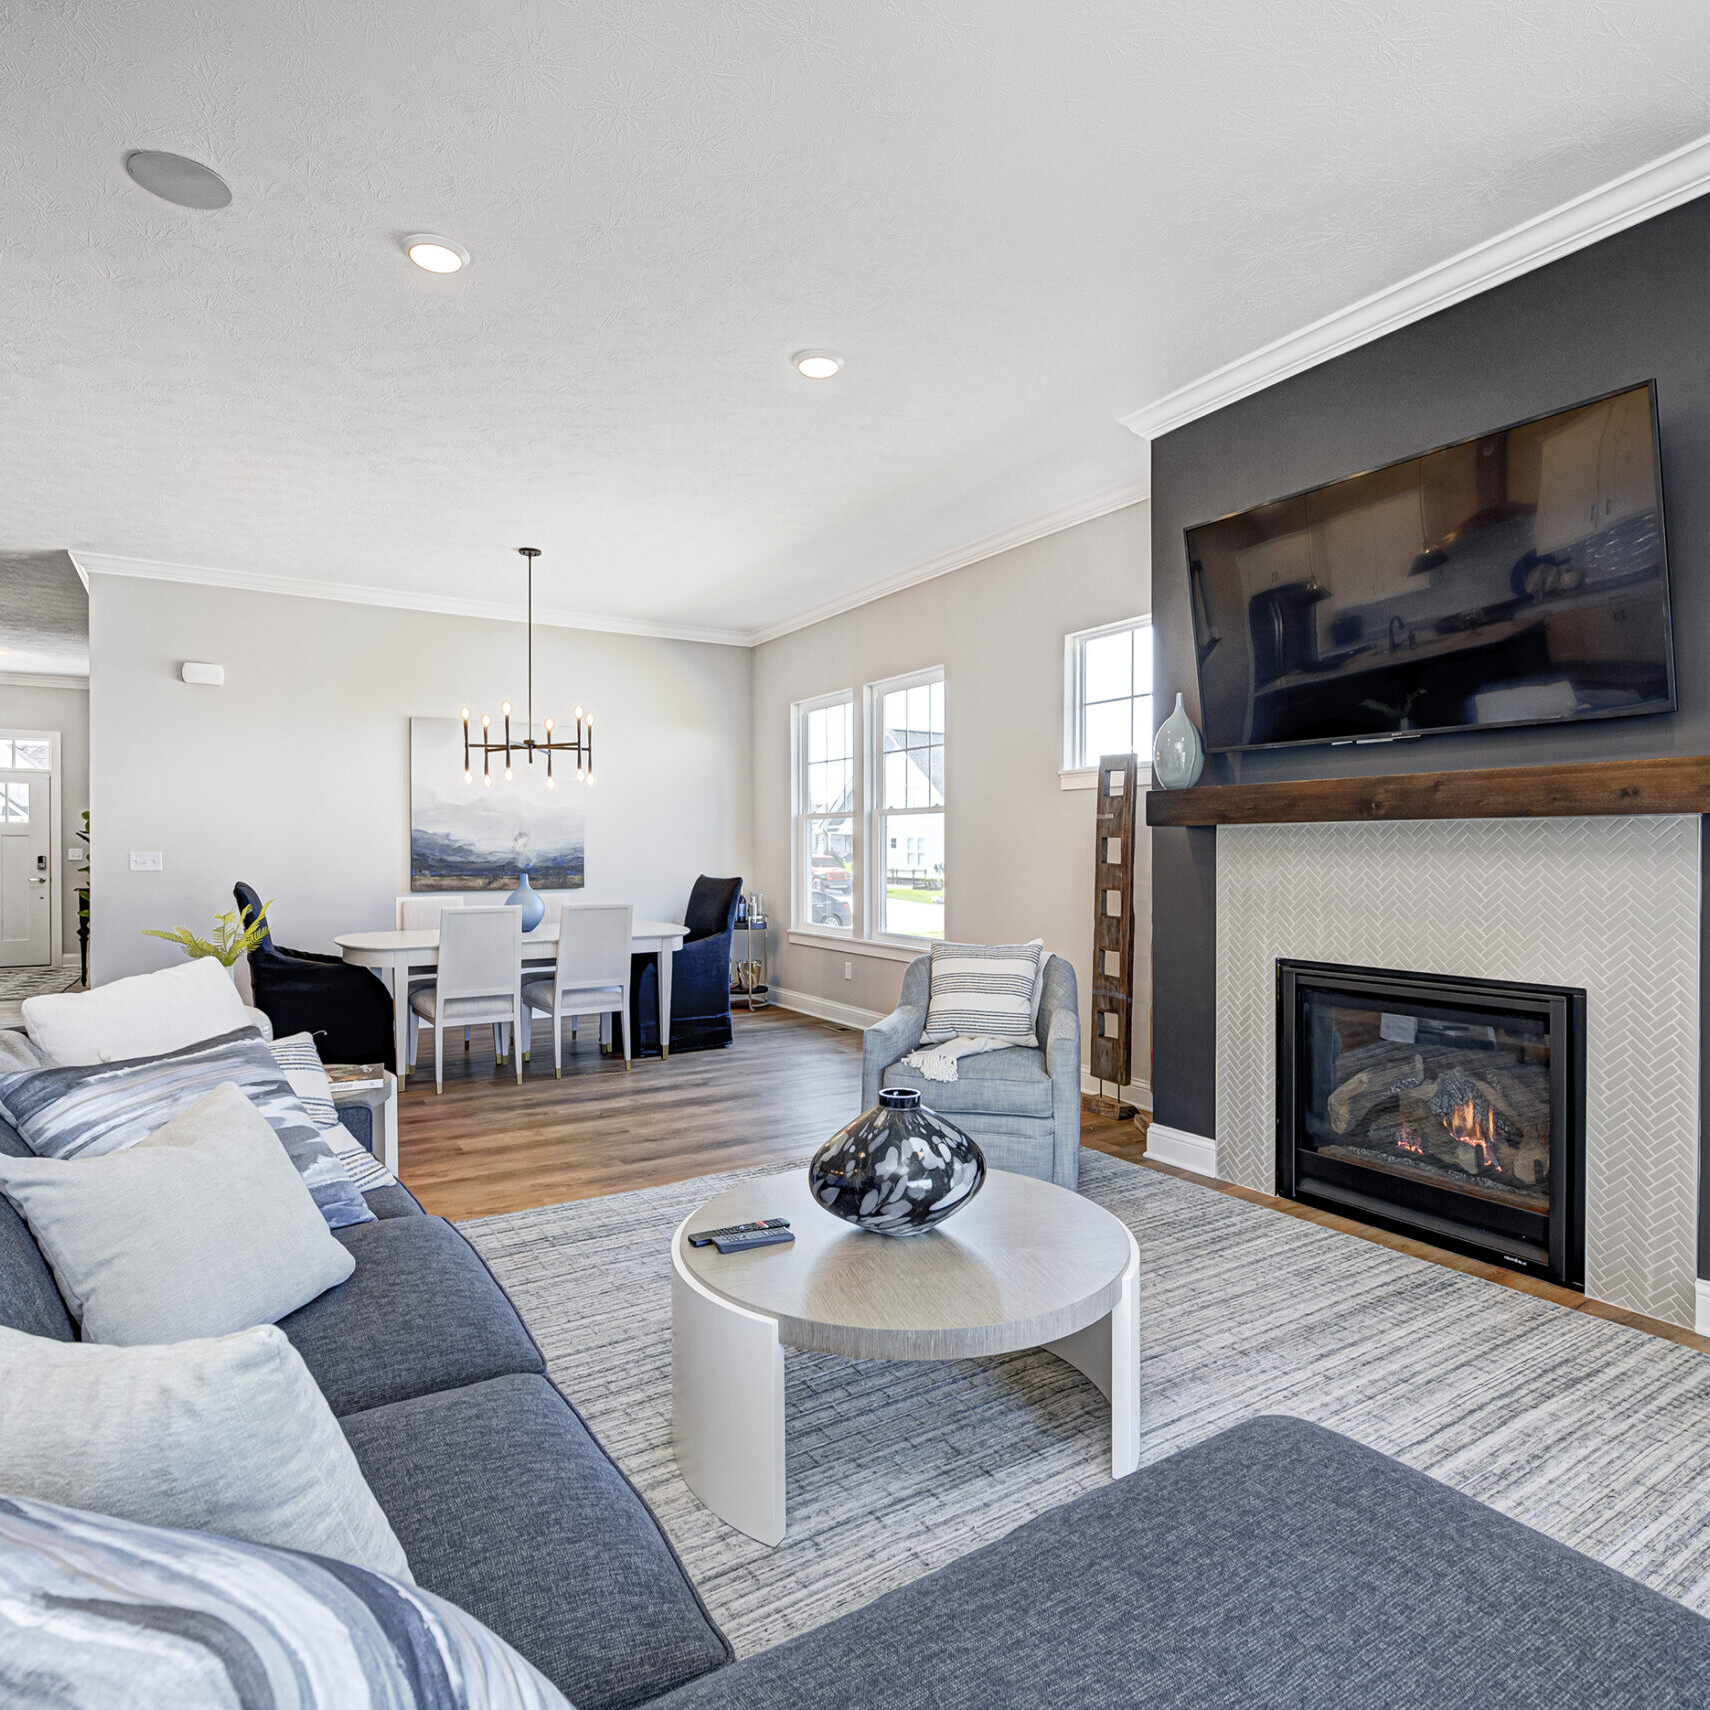 Looking for a new home in Carmel or Fishers, Indiana? Look no further! This stunning living room features a cozy fireplace and state-of-the-art TV.